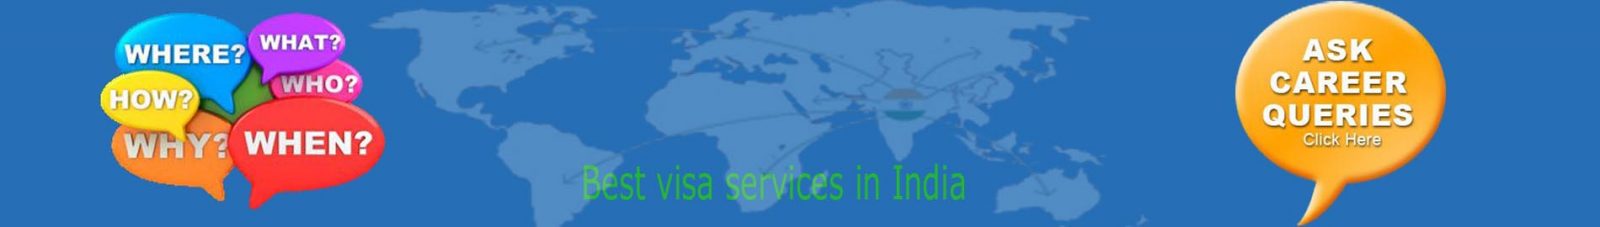 Looking for Best visa services in India?